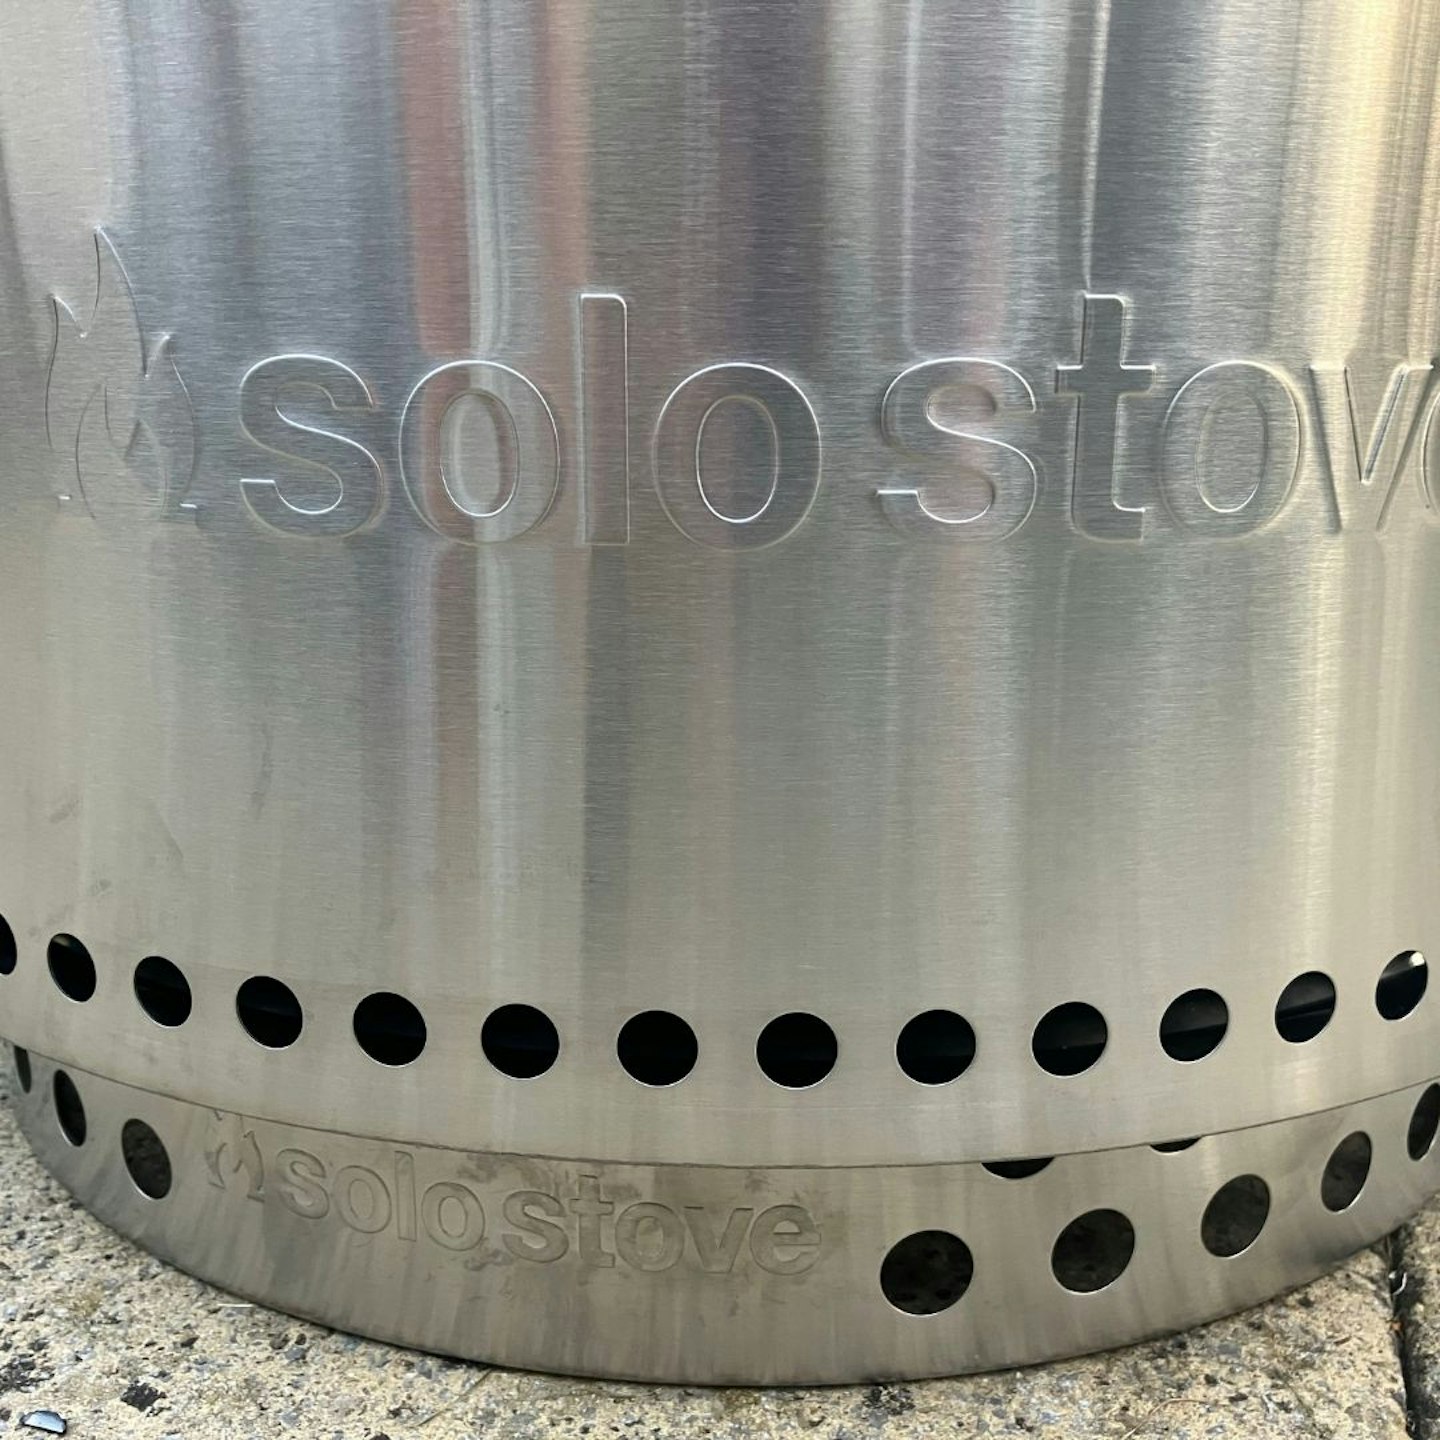 solo stove vent system and logo